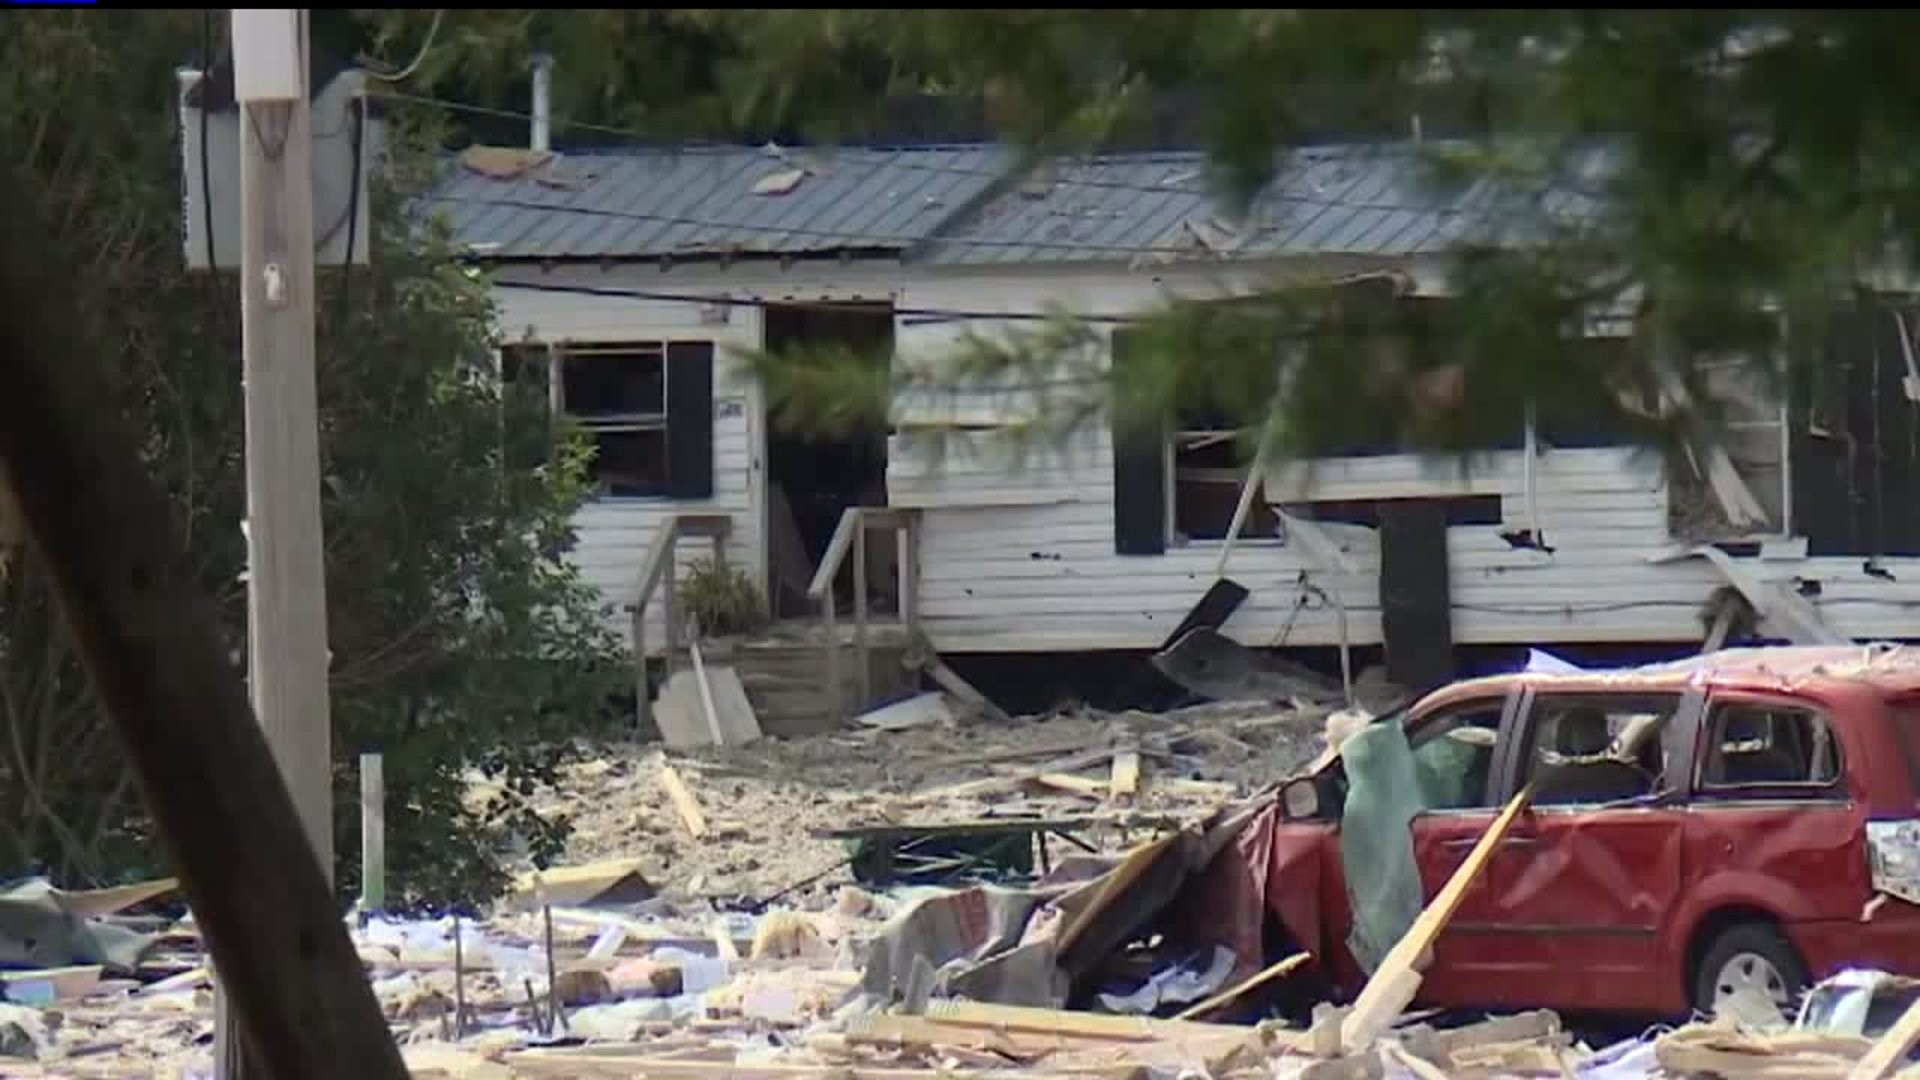 Cleanup for building explosion in Maine